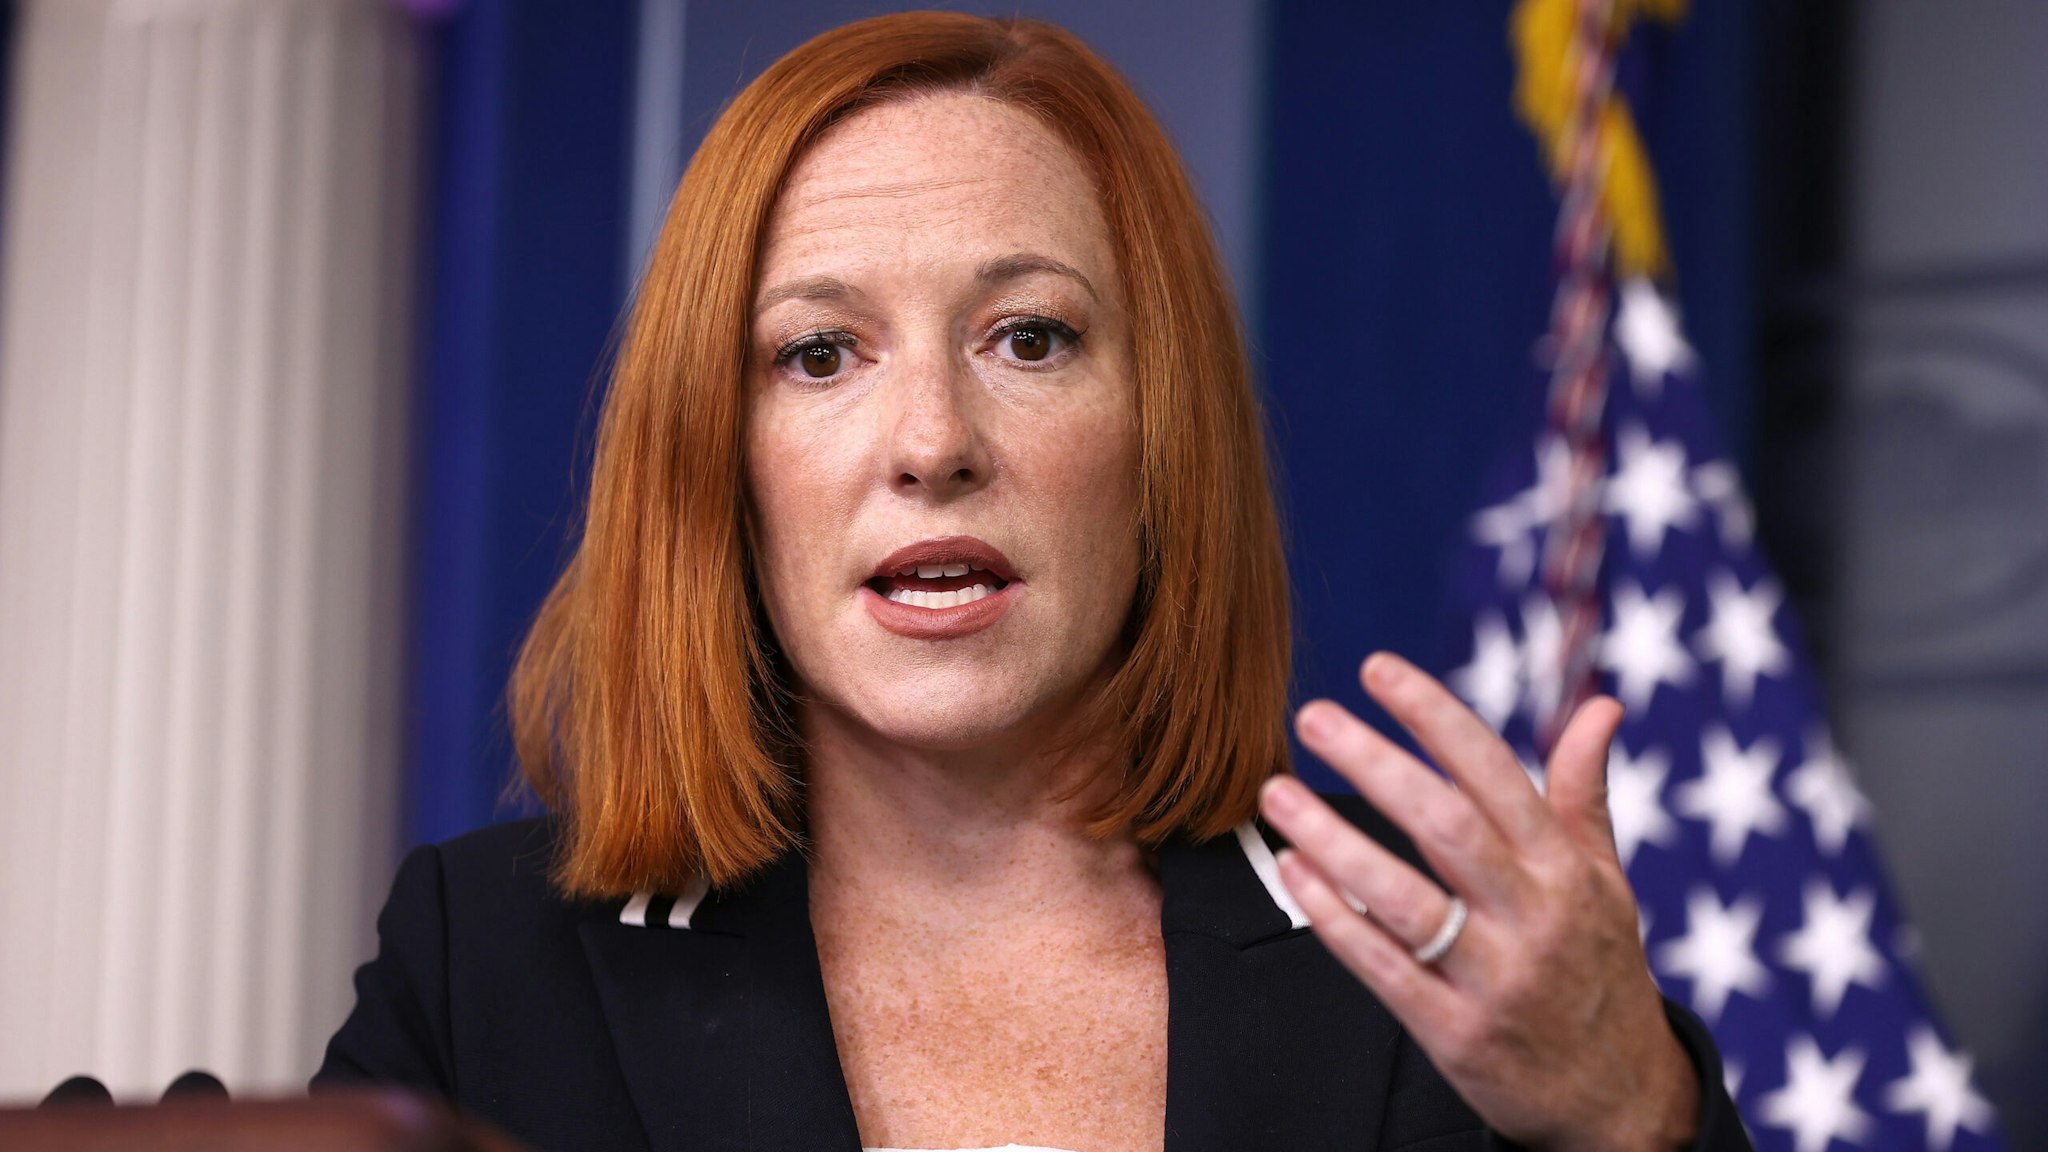 WASHINGTON, DC - SEPTEMBER 02: White House Press Secretary Jen Psaki talks to reporters during the daily news conference in the Brady Press Briefing Room at the White House on September 02, 2021 in Washington, DC. Psaki answered questions about the ongoing federal response to Hurricane Ida, the Supreme Court's decision on a new Texas anti-abortion law, Afghan refugees in the United States and other topics.